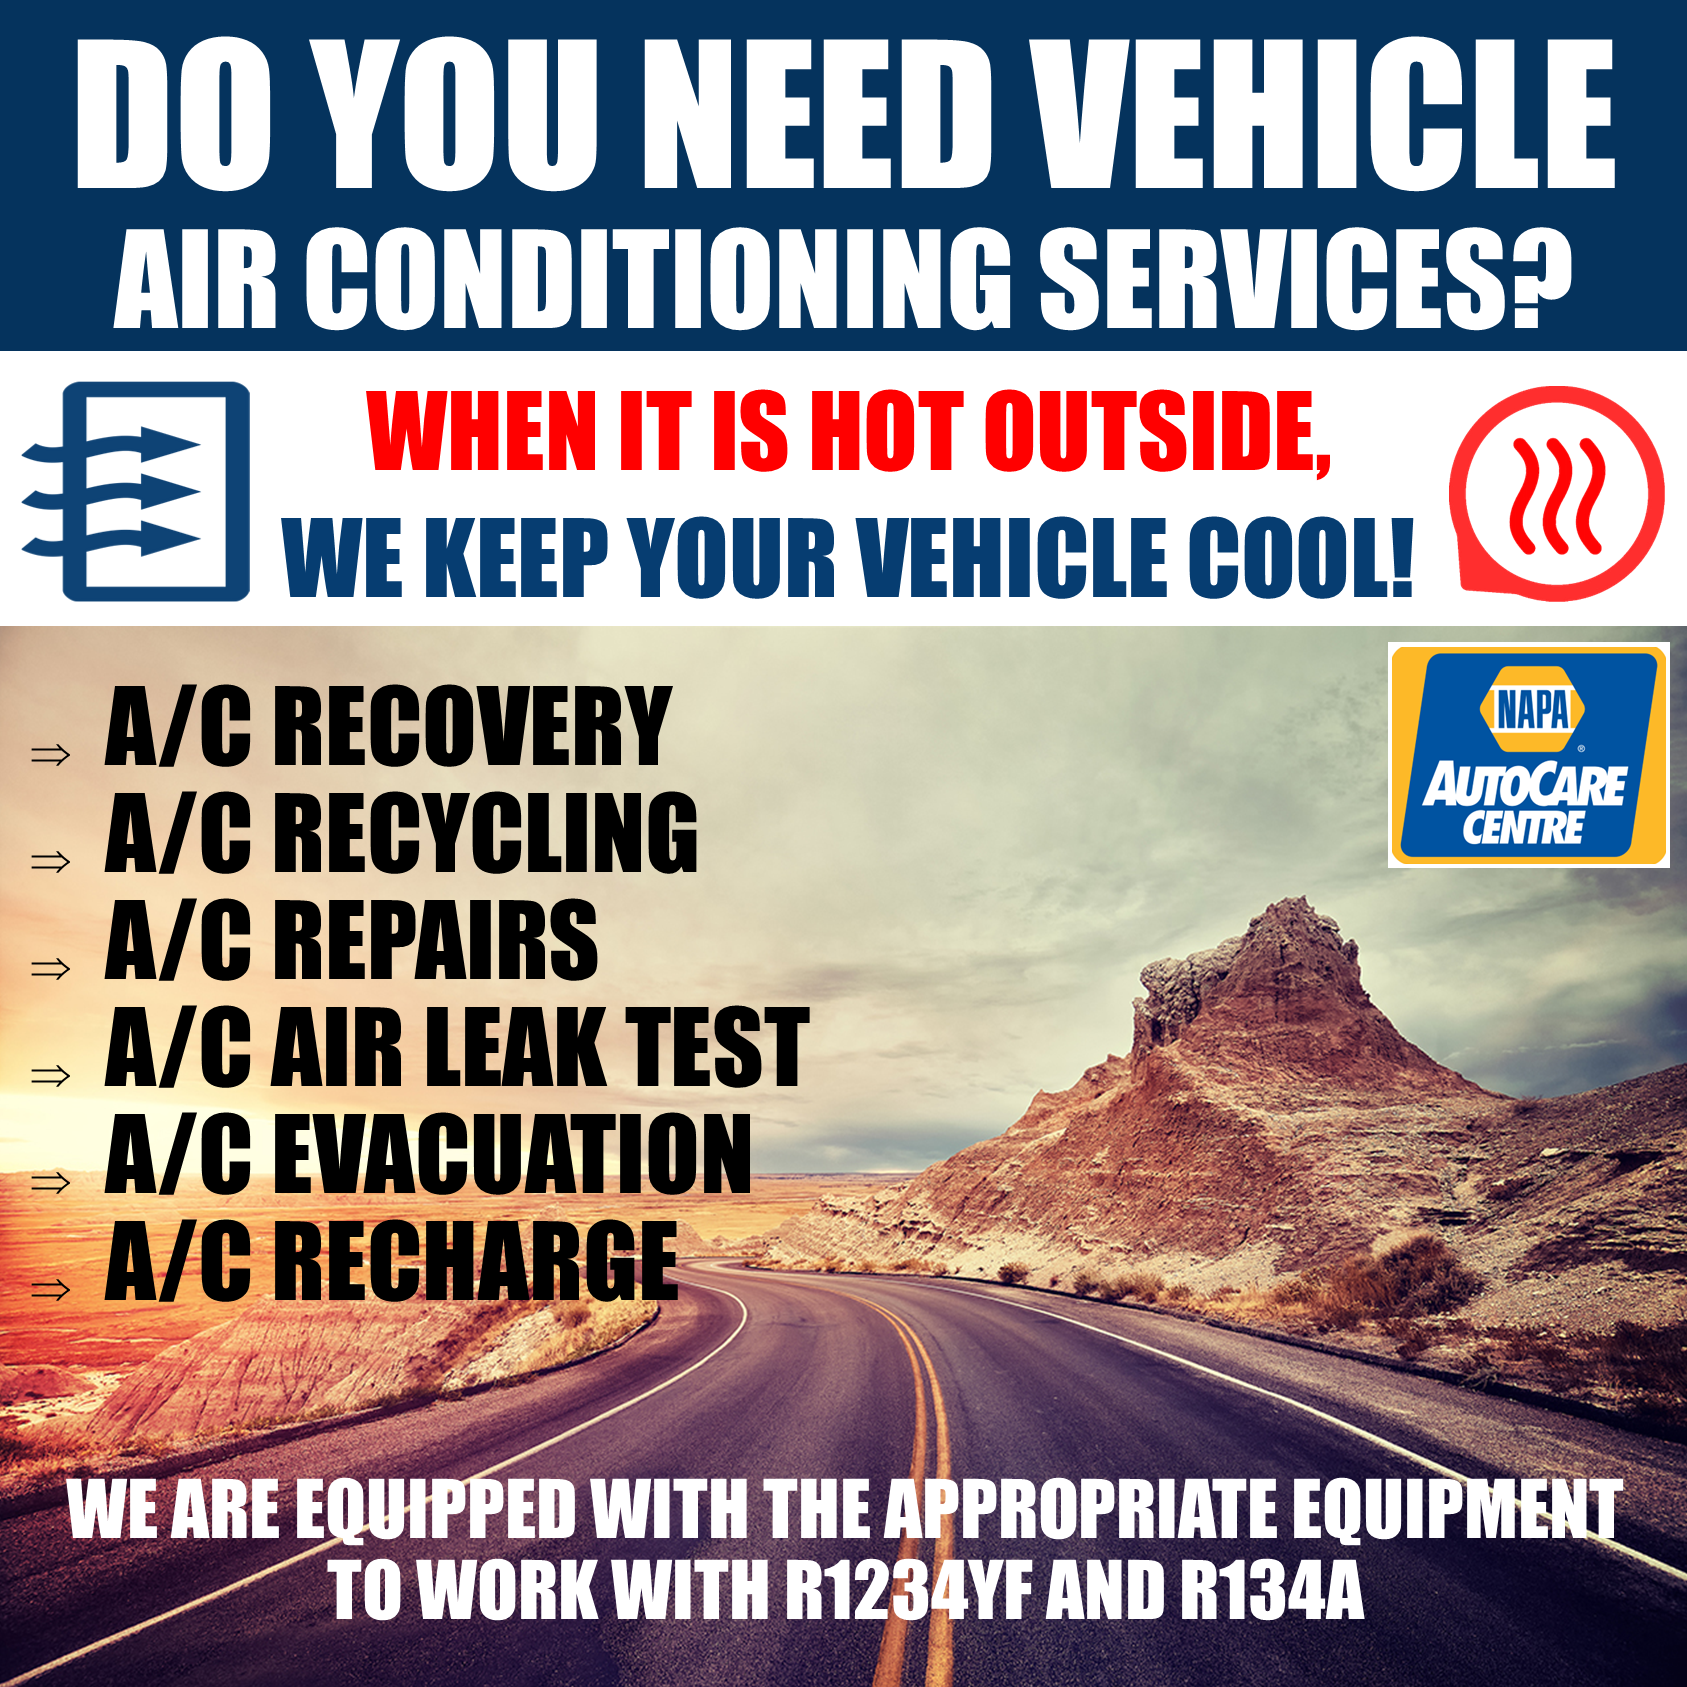 Vehicle Air Conditioning Inspection, Recharge and repairs near Edmonton and St Albert, AB.